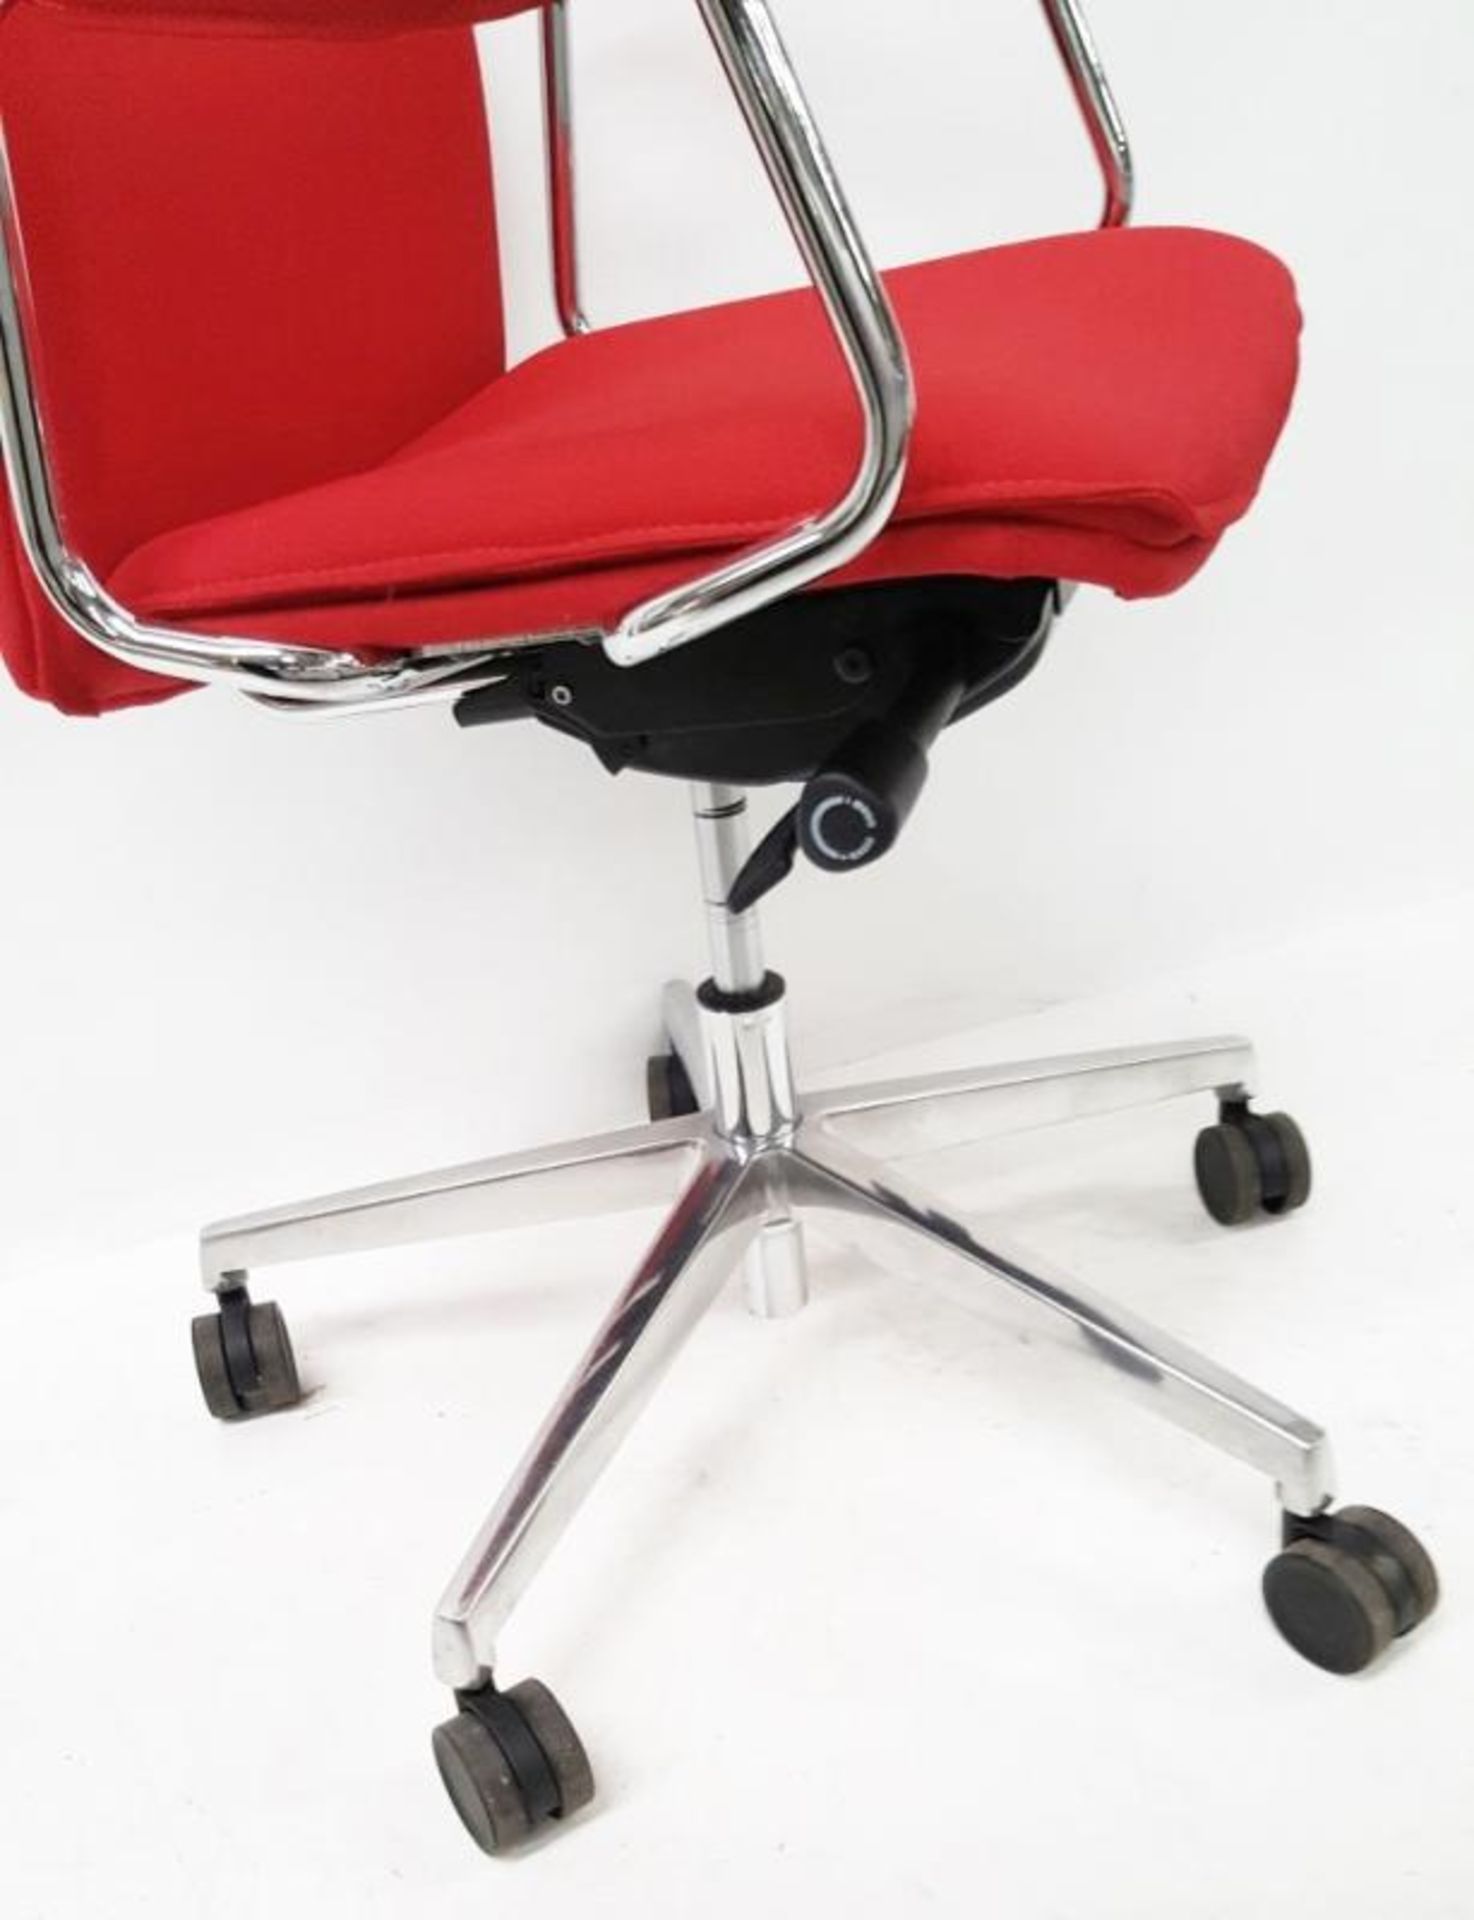 1 x 'Sven Christiansen' Premium Designer High-back Office Chair In Red (HBB1HA) - Used, In Very Good - Image 4 of 7